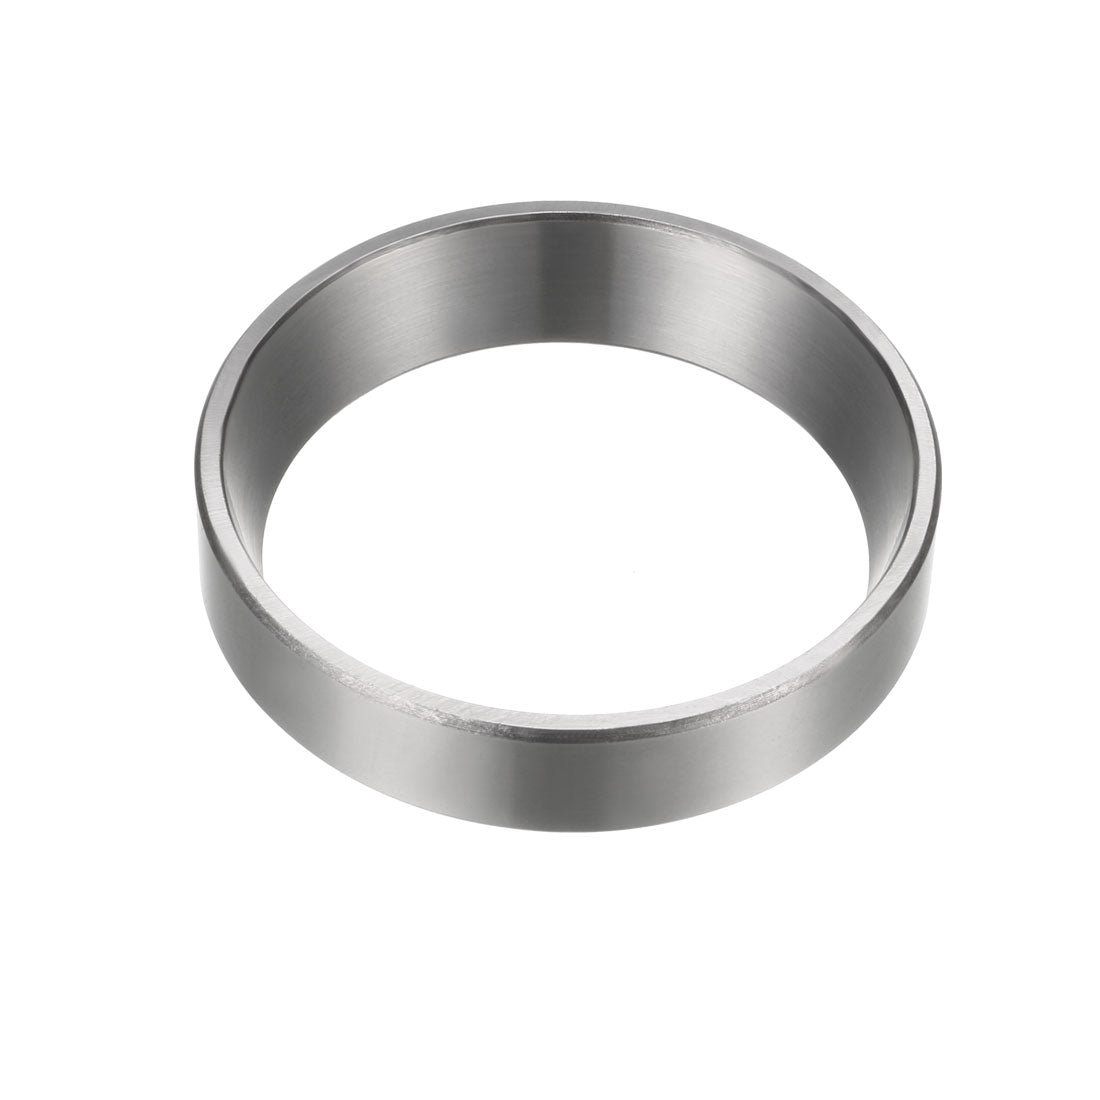 Uxcell Uxcell L44610 Tapered Roller Bearing Outer Race Cup 1.98" Outside Diameter, 0.42" Width